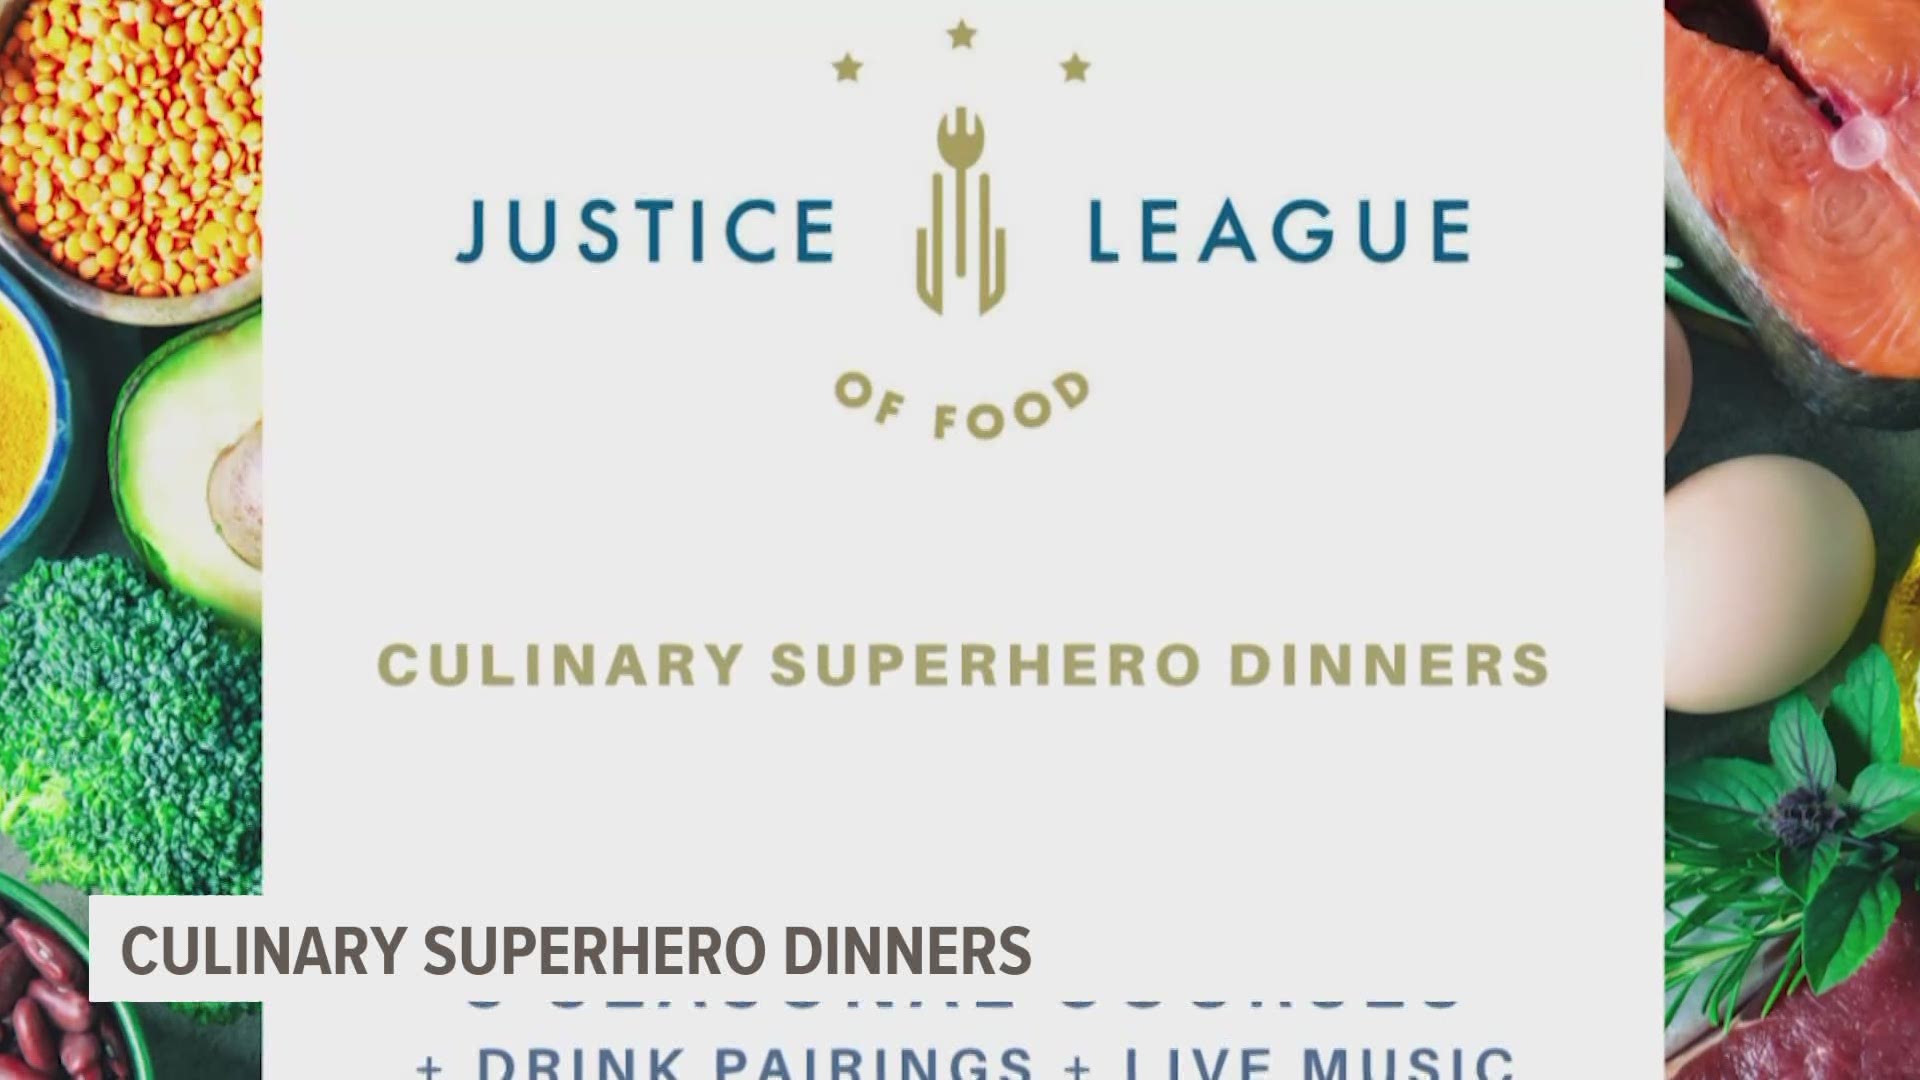 Deadline for June 14th dinner is today! justiceleagueoffood.org